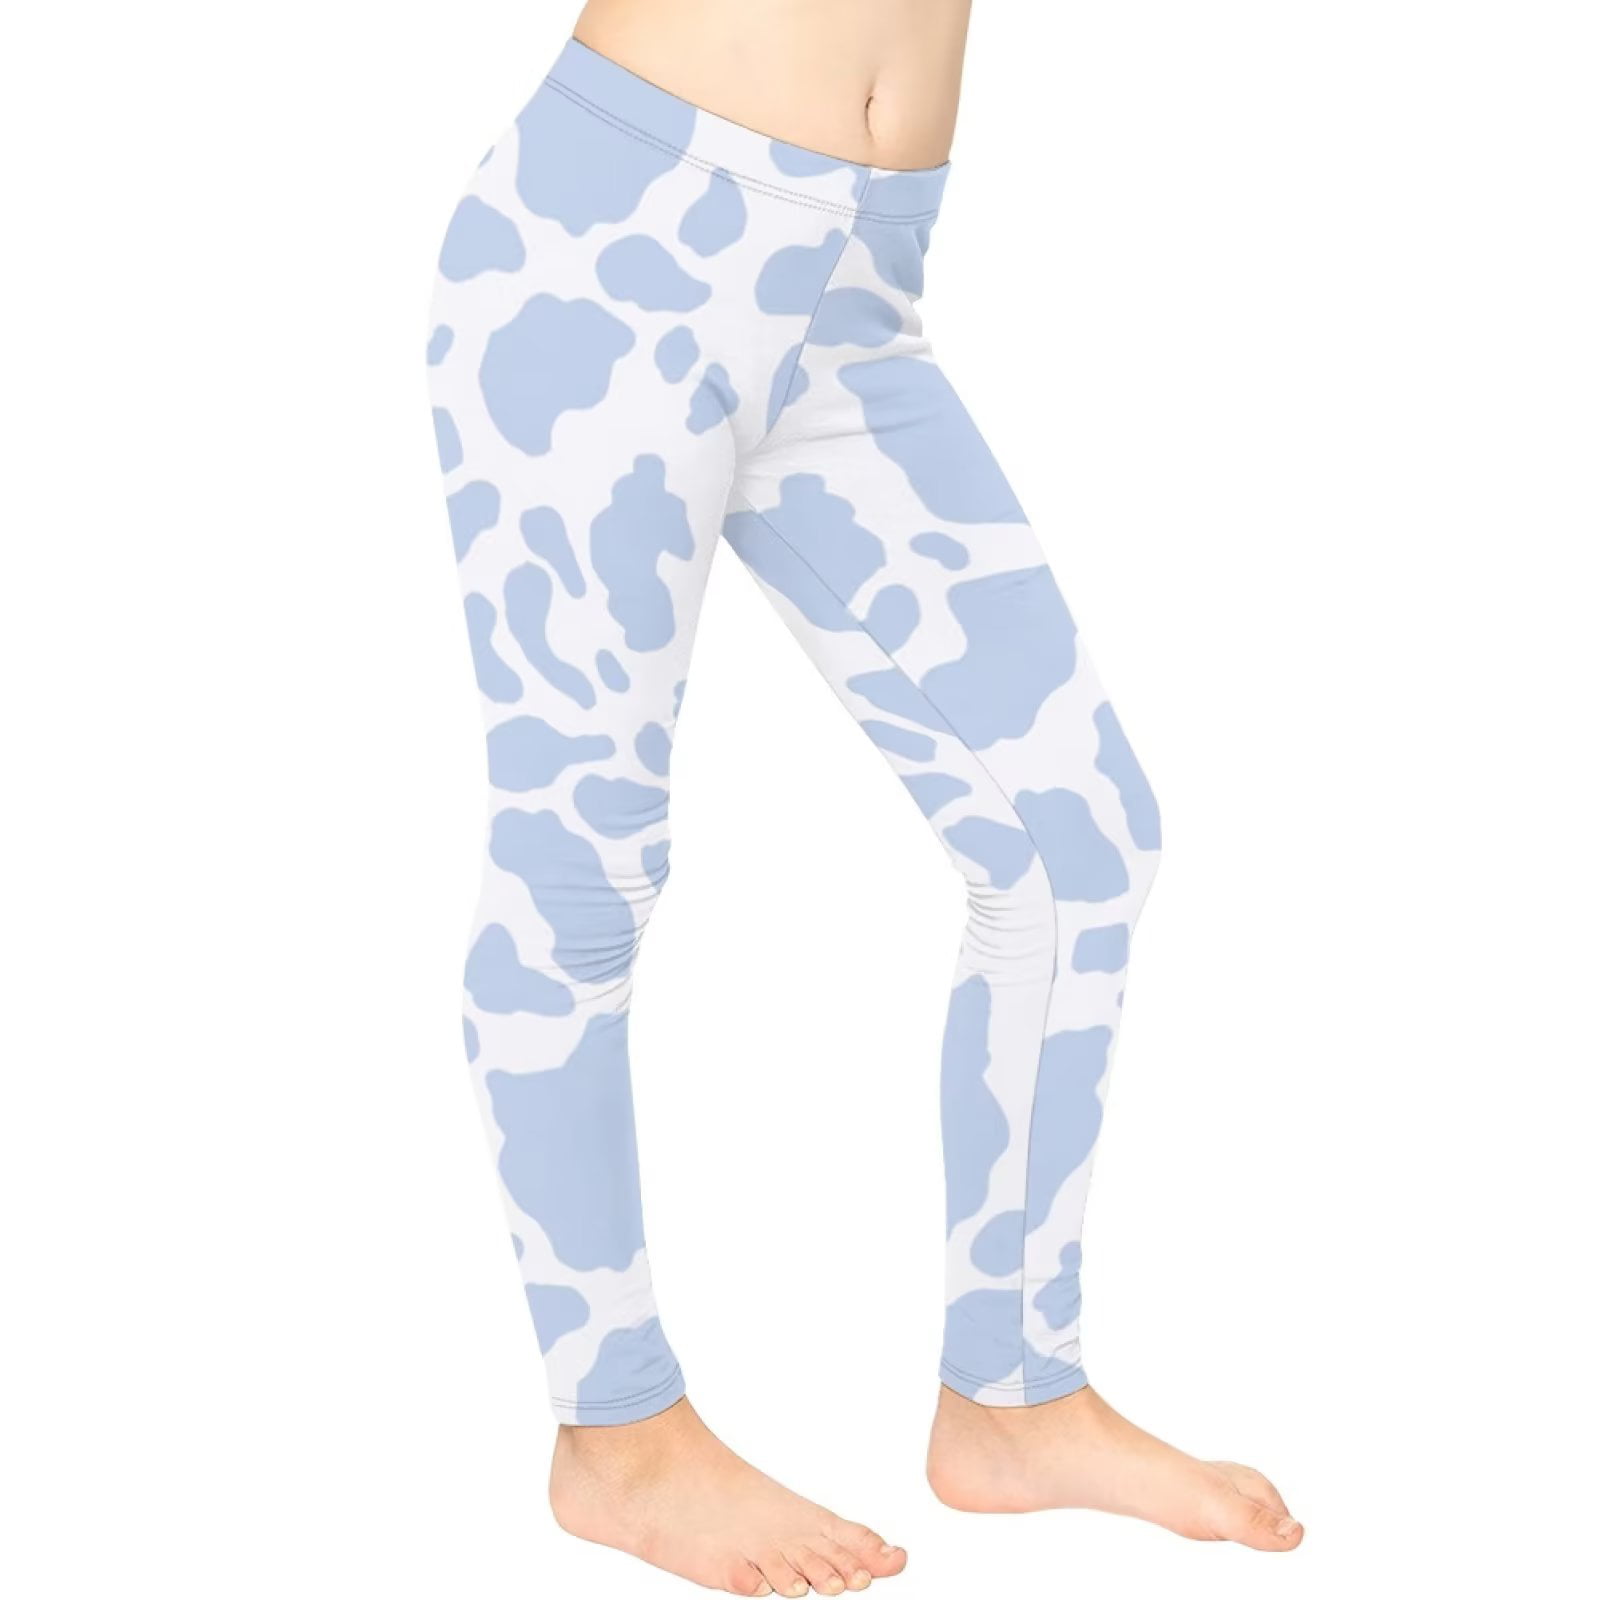  CaTaKu Girls Leggings Blue Moon Stars Kids Printed Pants  Athletic Tights Leggings for Girls Size 4T: Clothing, Shoes & Jewelry